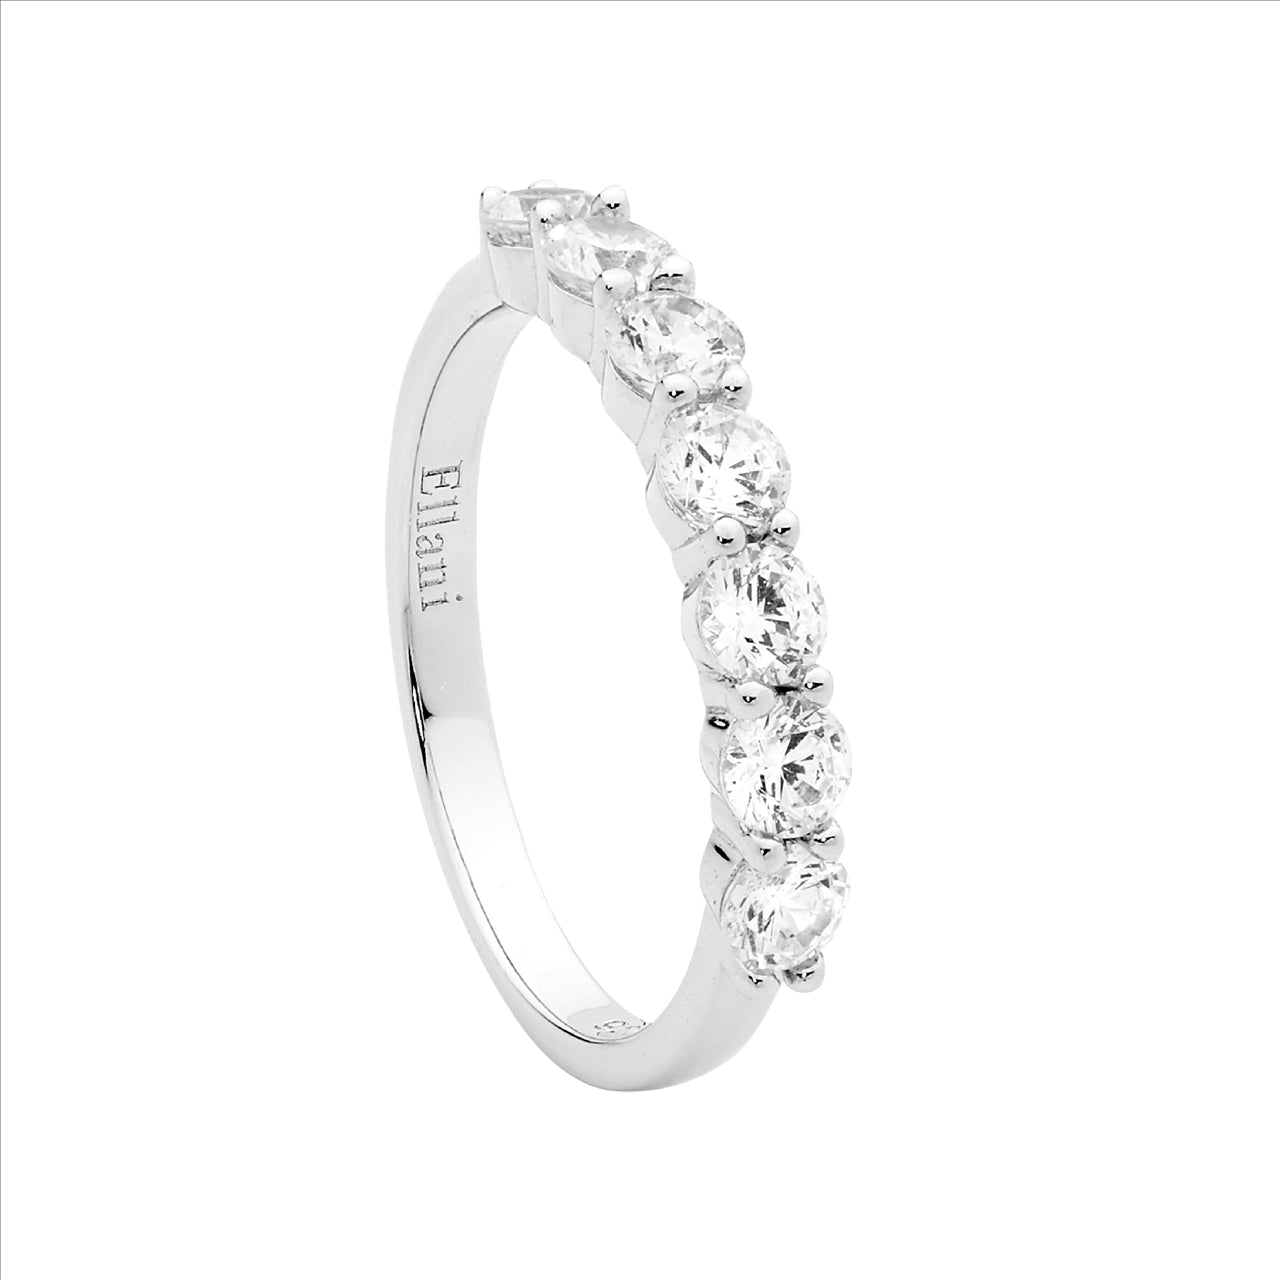 SS 7 x 3.5mm wh cz ring